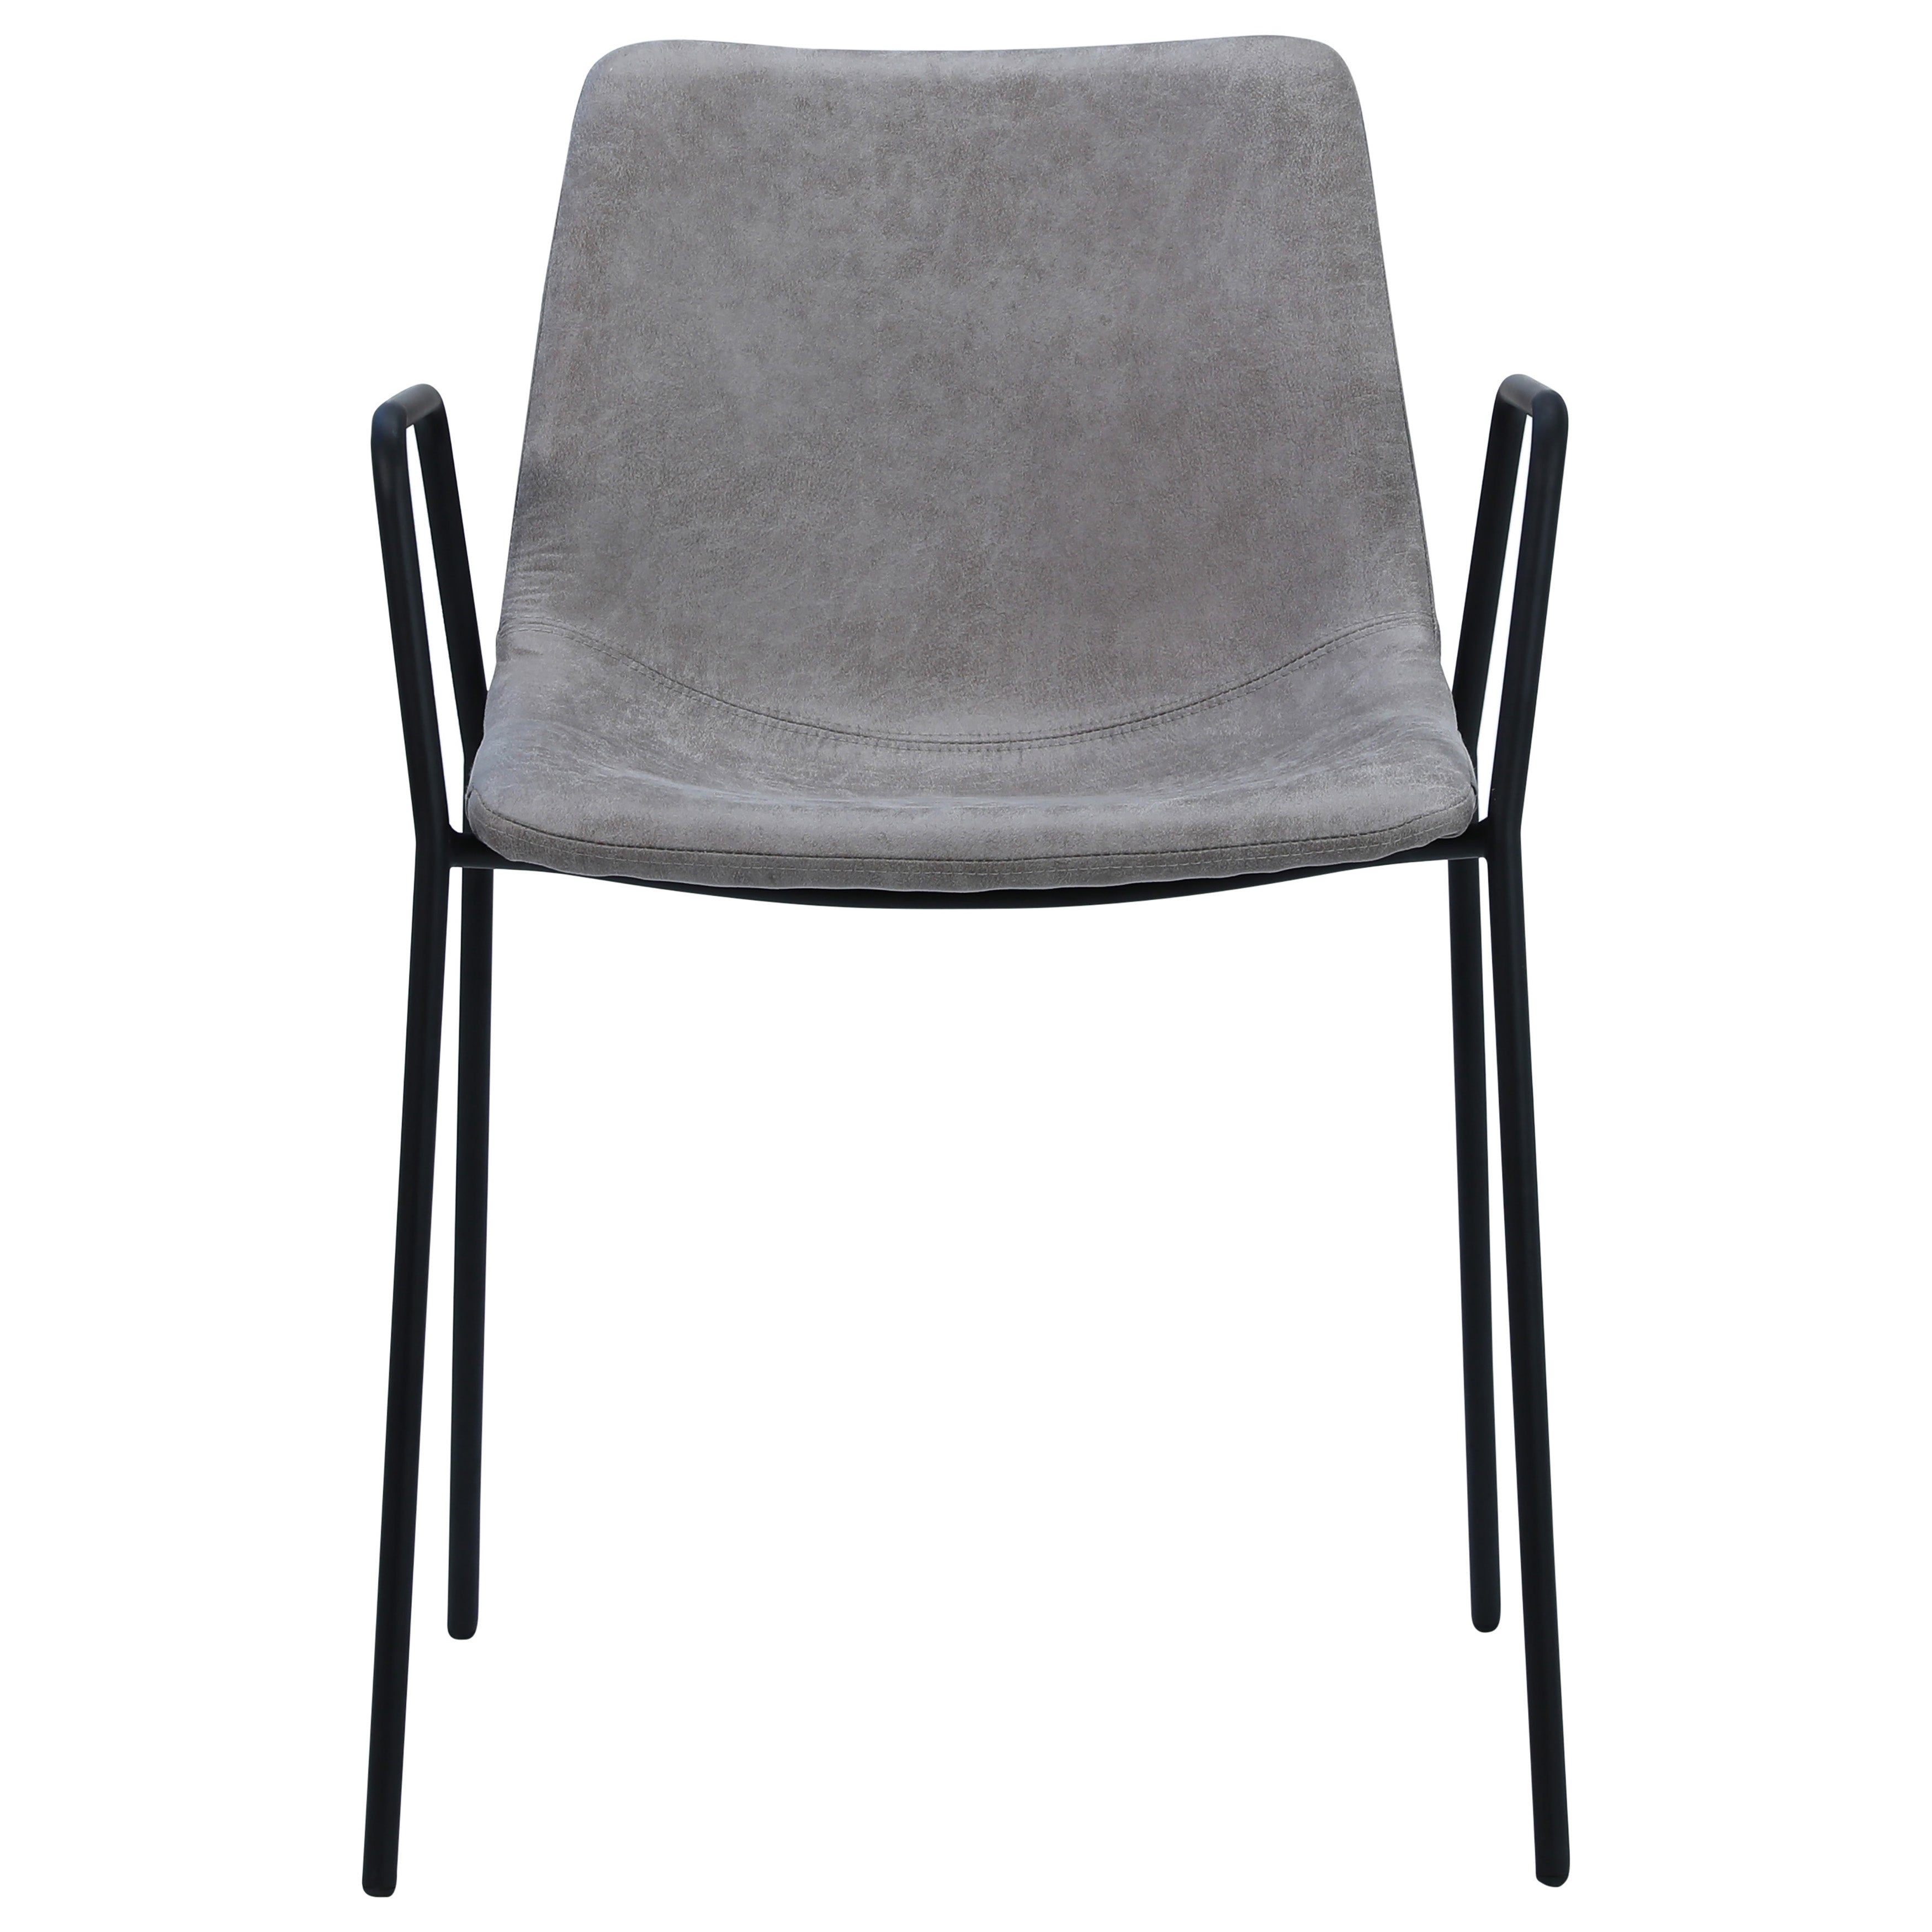 Simple yet striking, this dining chair is ideal for your contemporary dining area. Featuring PU leather seating in a light grey color and a sleek black metal frame. This dining chair is the ultimate seating option for your modern space. Amethyst Home provides interior design, new home construction design consulting, vintage area rugs, and lighting in the Seattle metro area.